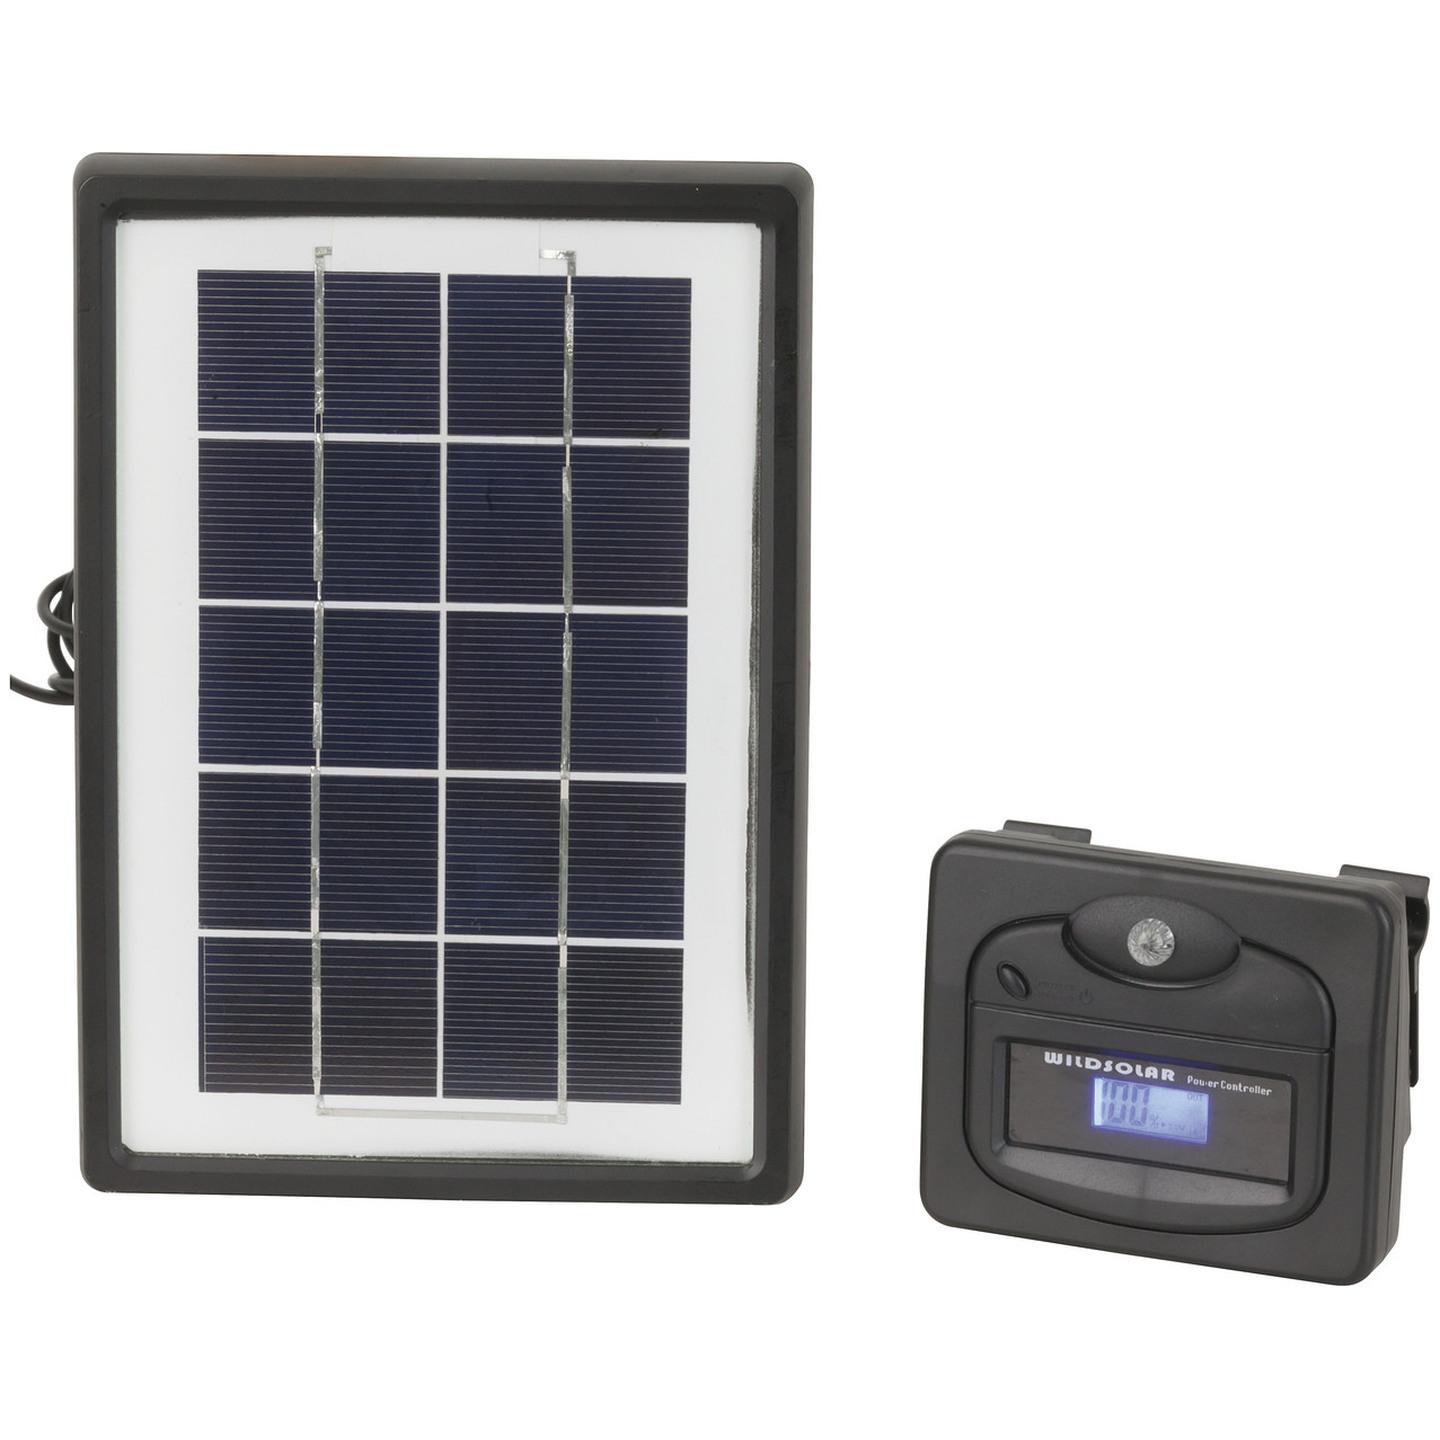 Solar Panel Charger to suit QC-8048 Outdoor Camera